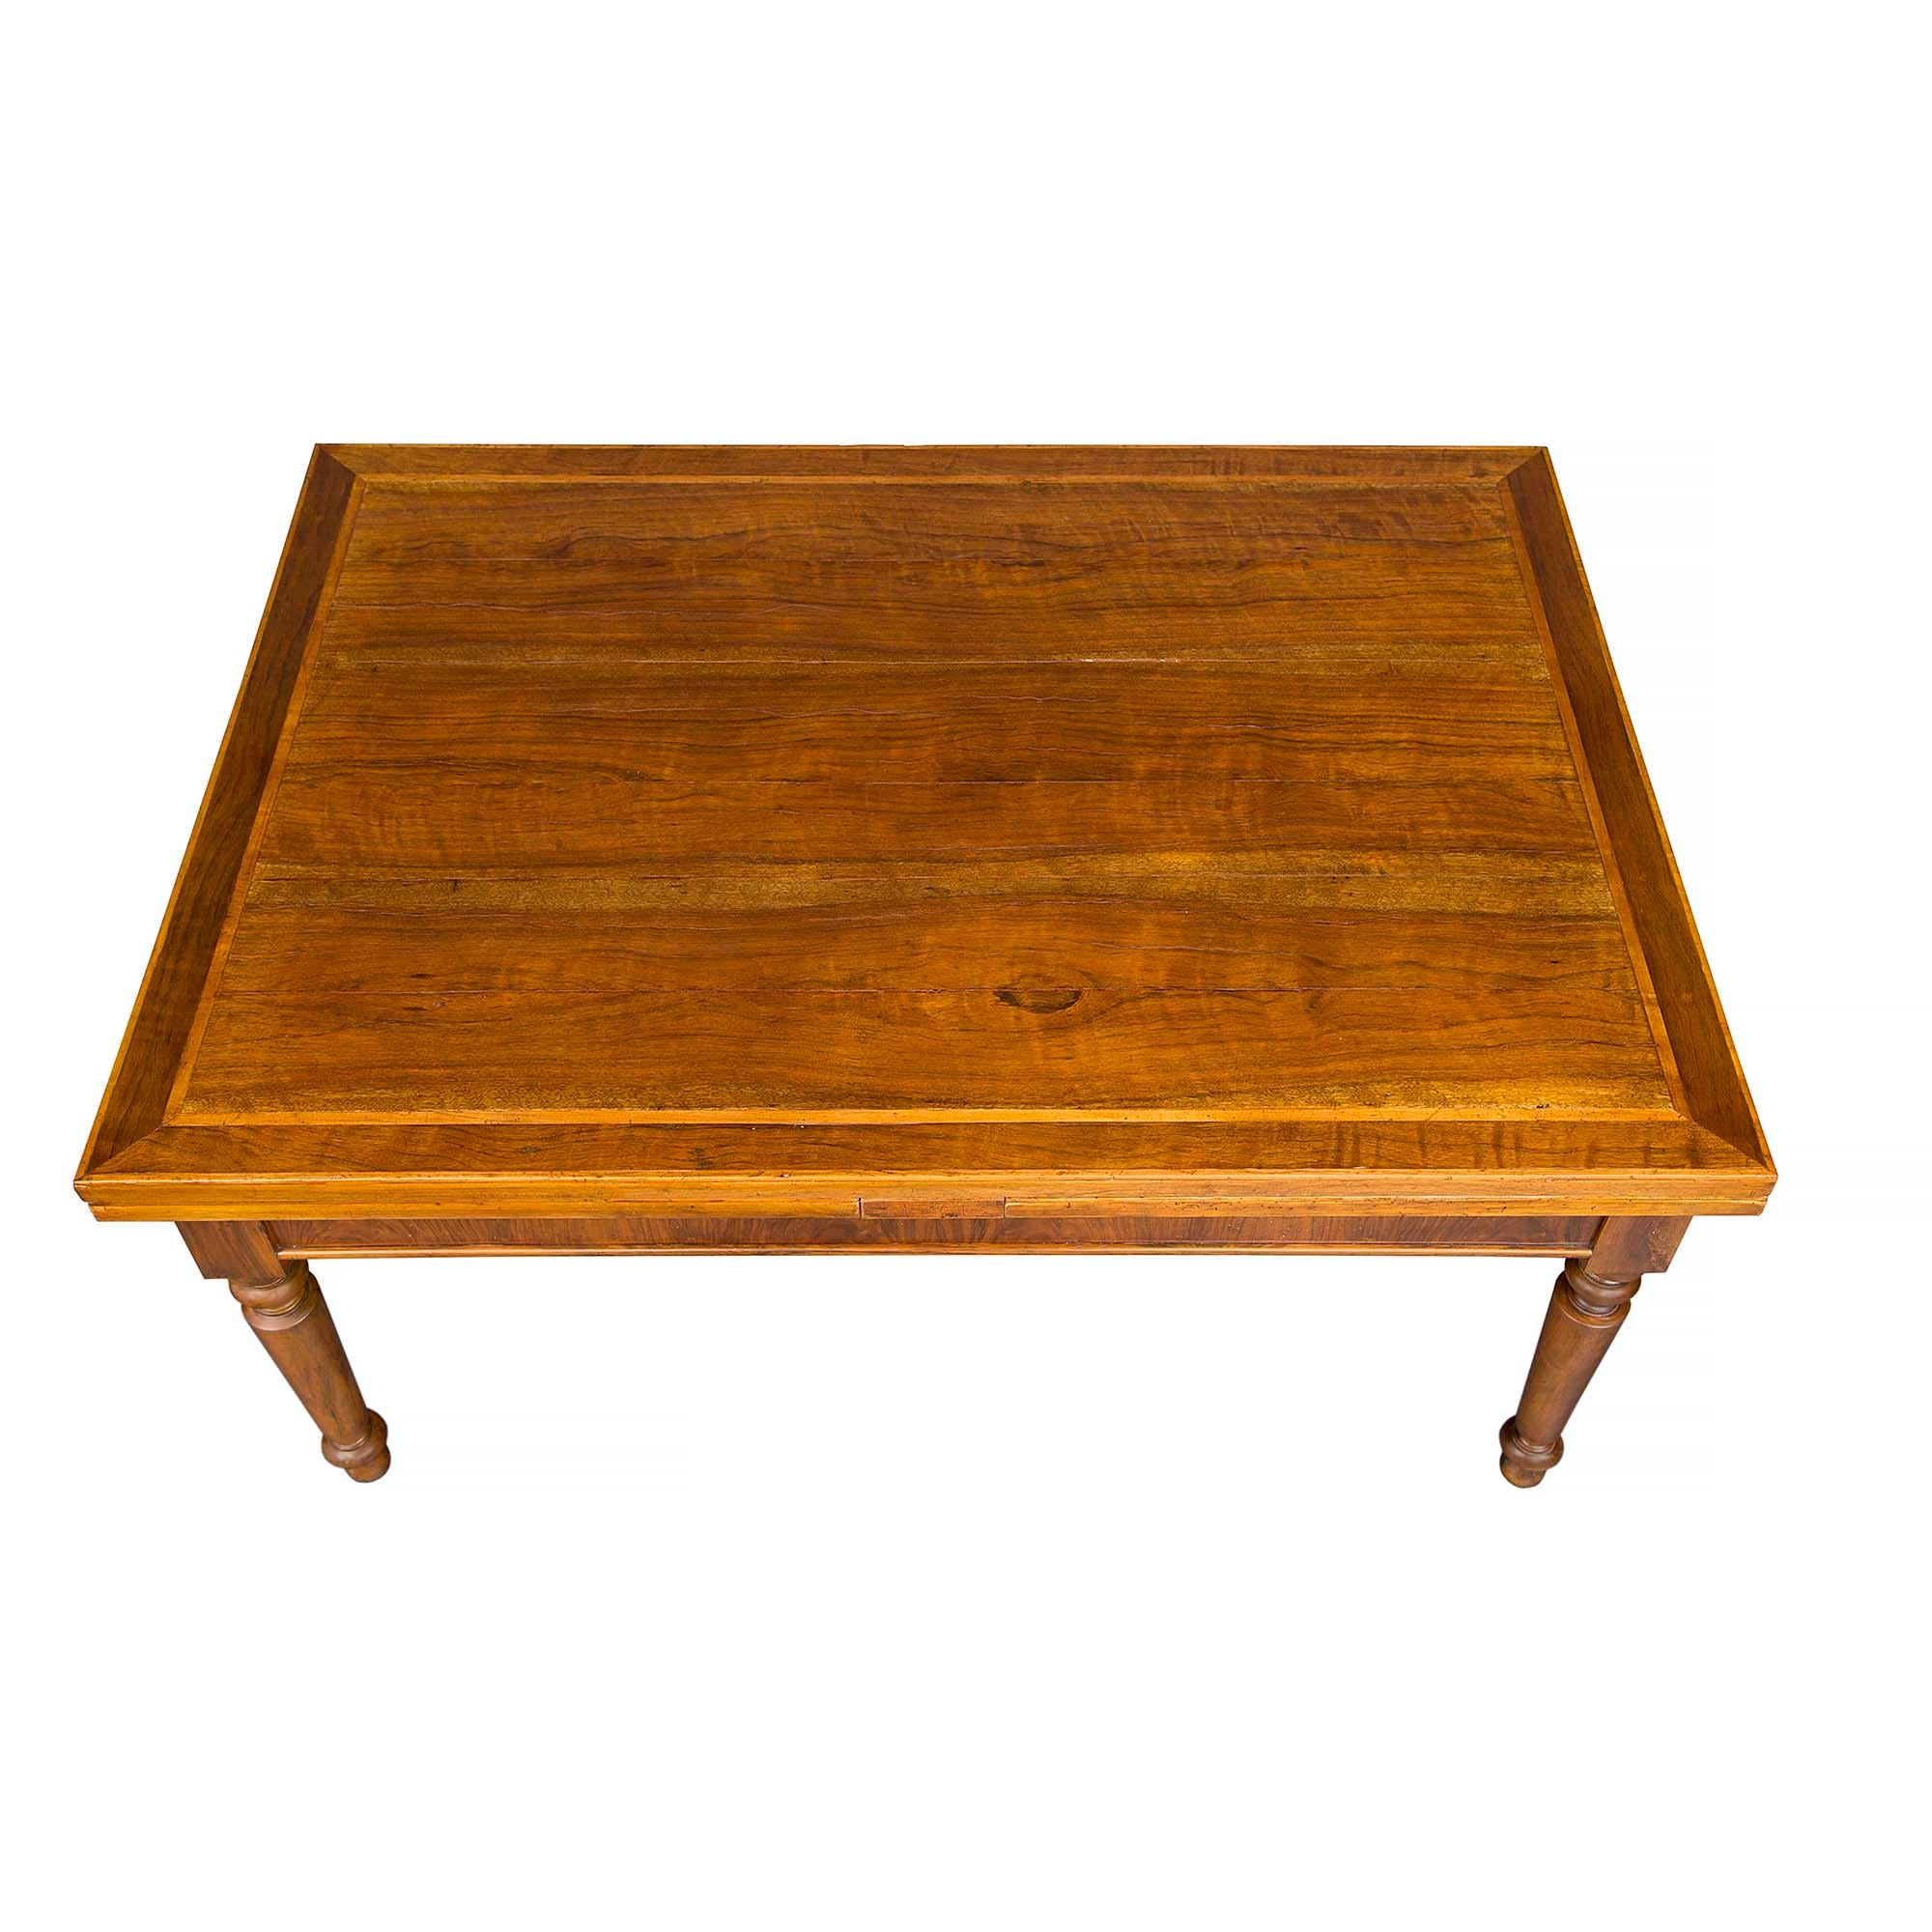 A handsome Italian 18th-century walnut pull out table from Tuscany. The table is raised by superb turned legs with topie shaped feet. To each side, above the straight frieze, are pull outs, each measuring 30 and when both pulled out extends the